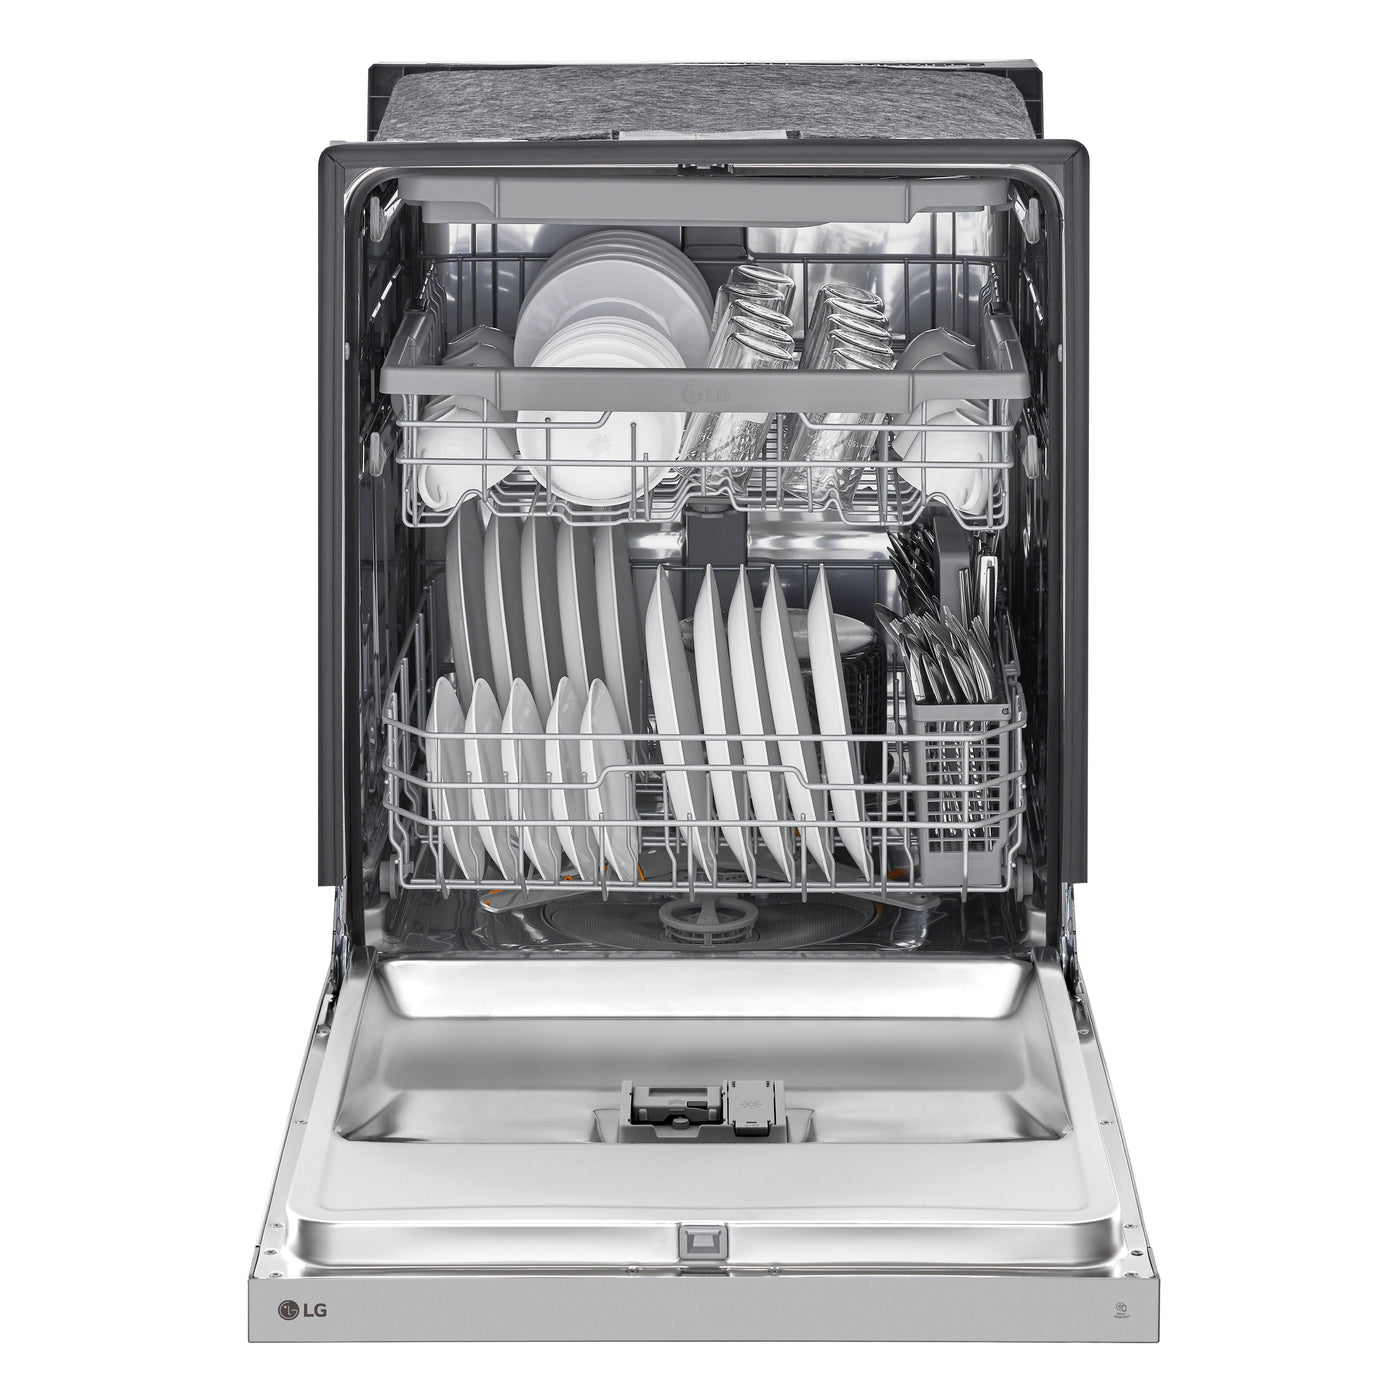 LG Smudge-Resistant Stainless Steel Front Control Dishwasher with QuadWash® and 3rd Rack - LDFN4542S